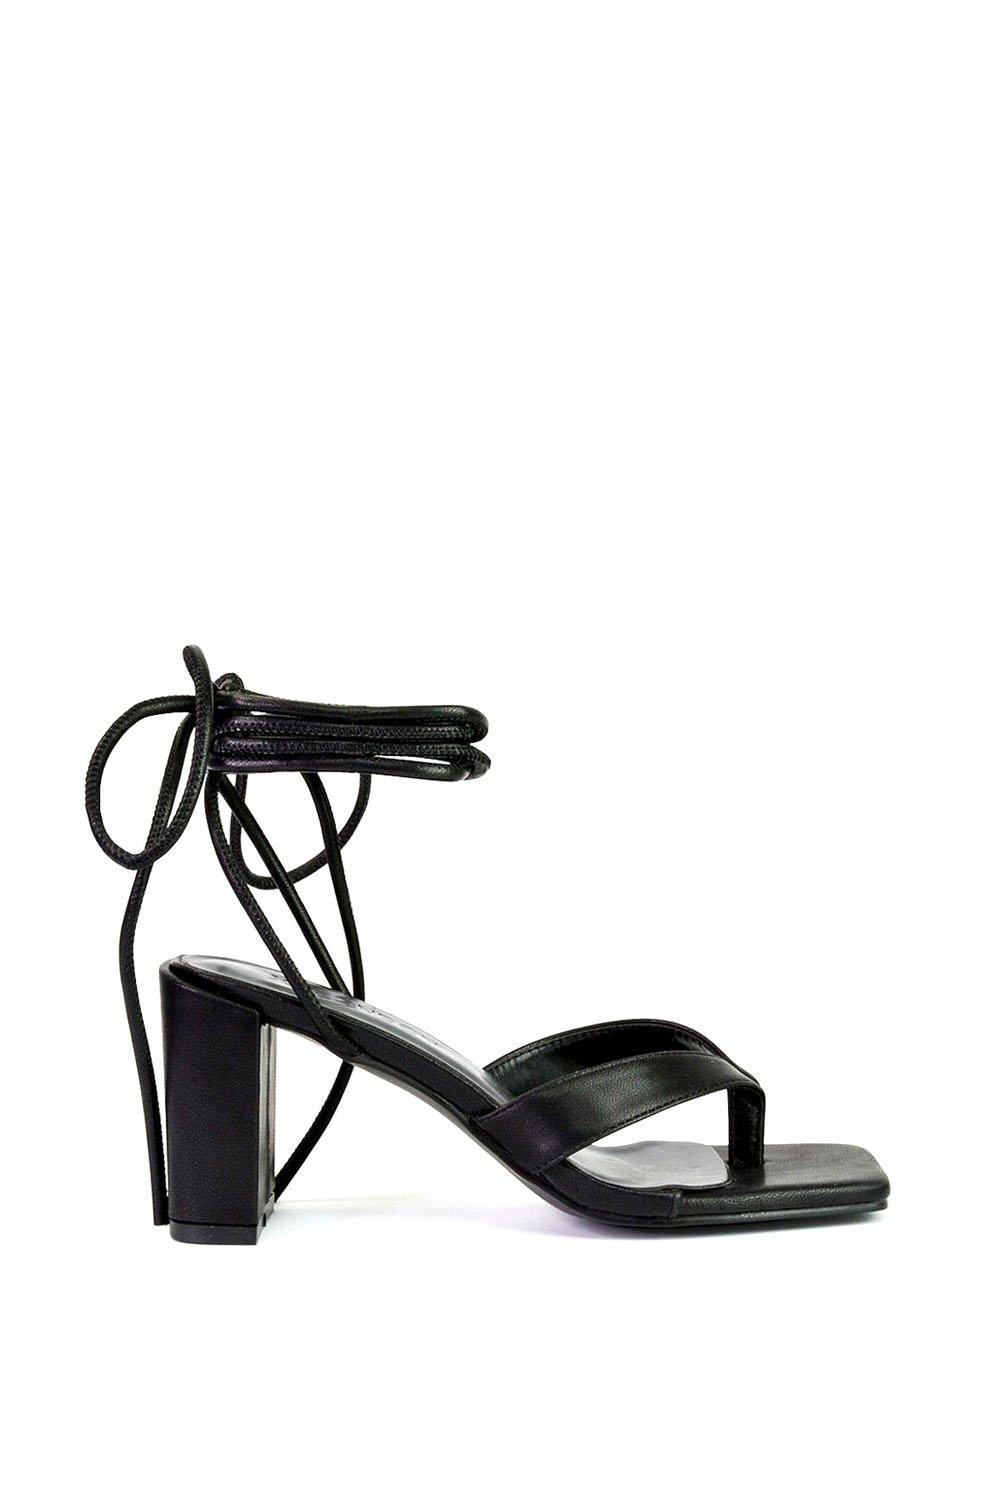 Heels | 'Kiko' Lace Up Thong Square Toe Strappy Mid Block Heel Sandals ...